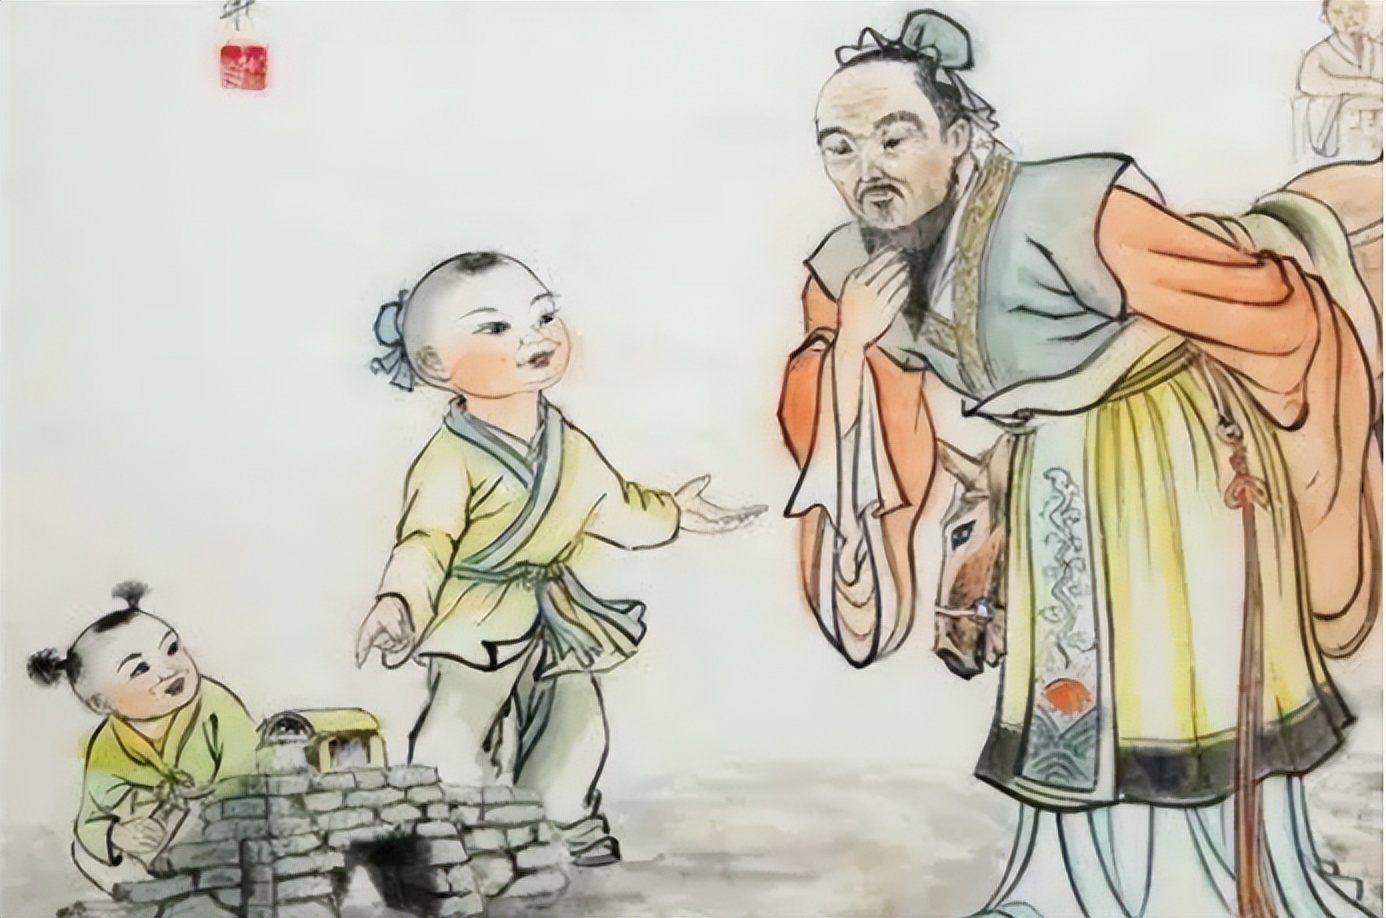 A 7-year-old child used a riddle to ask Confucius to take the initiative to